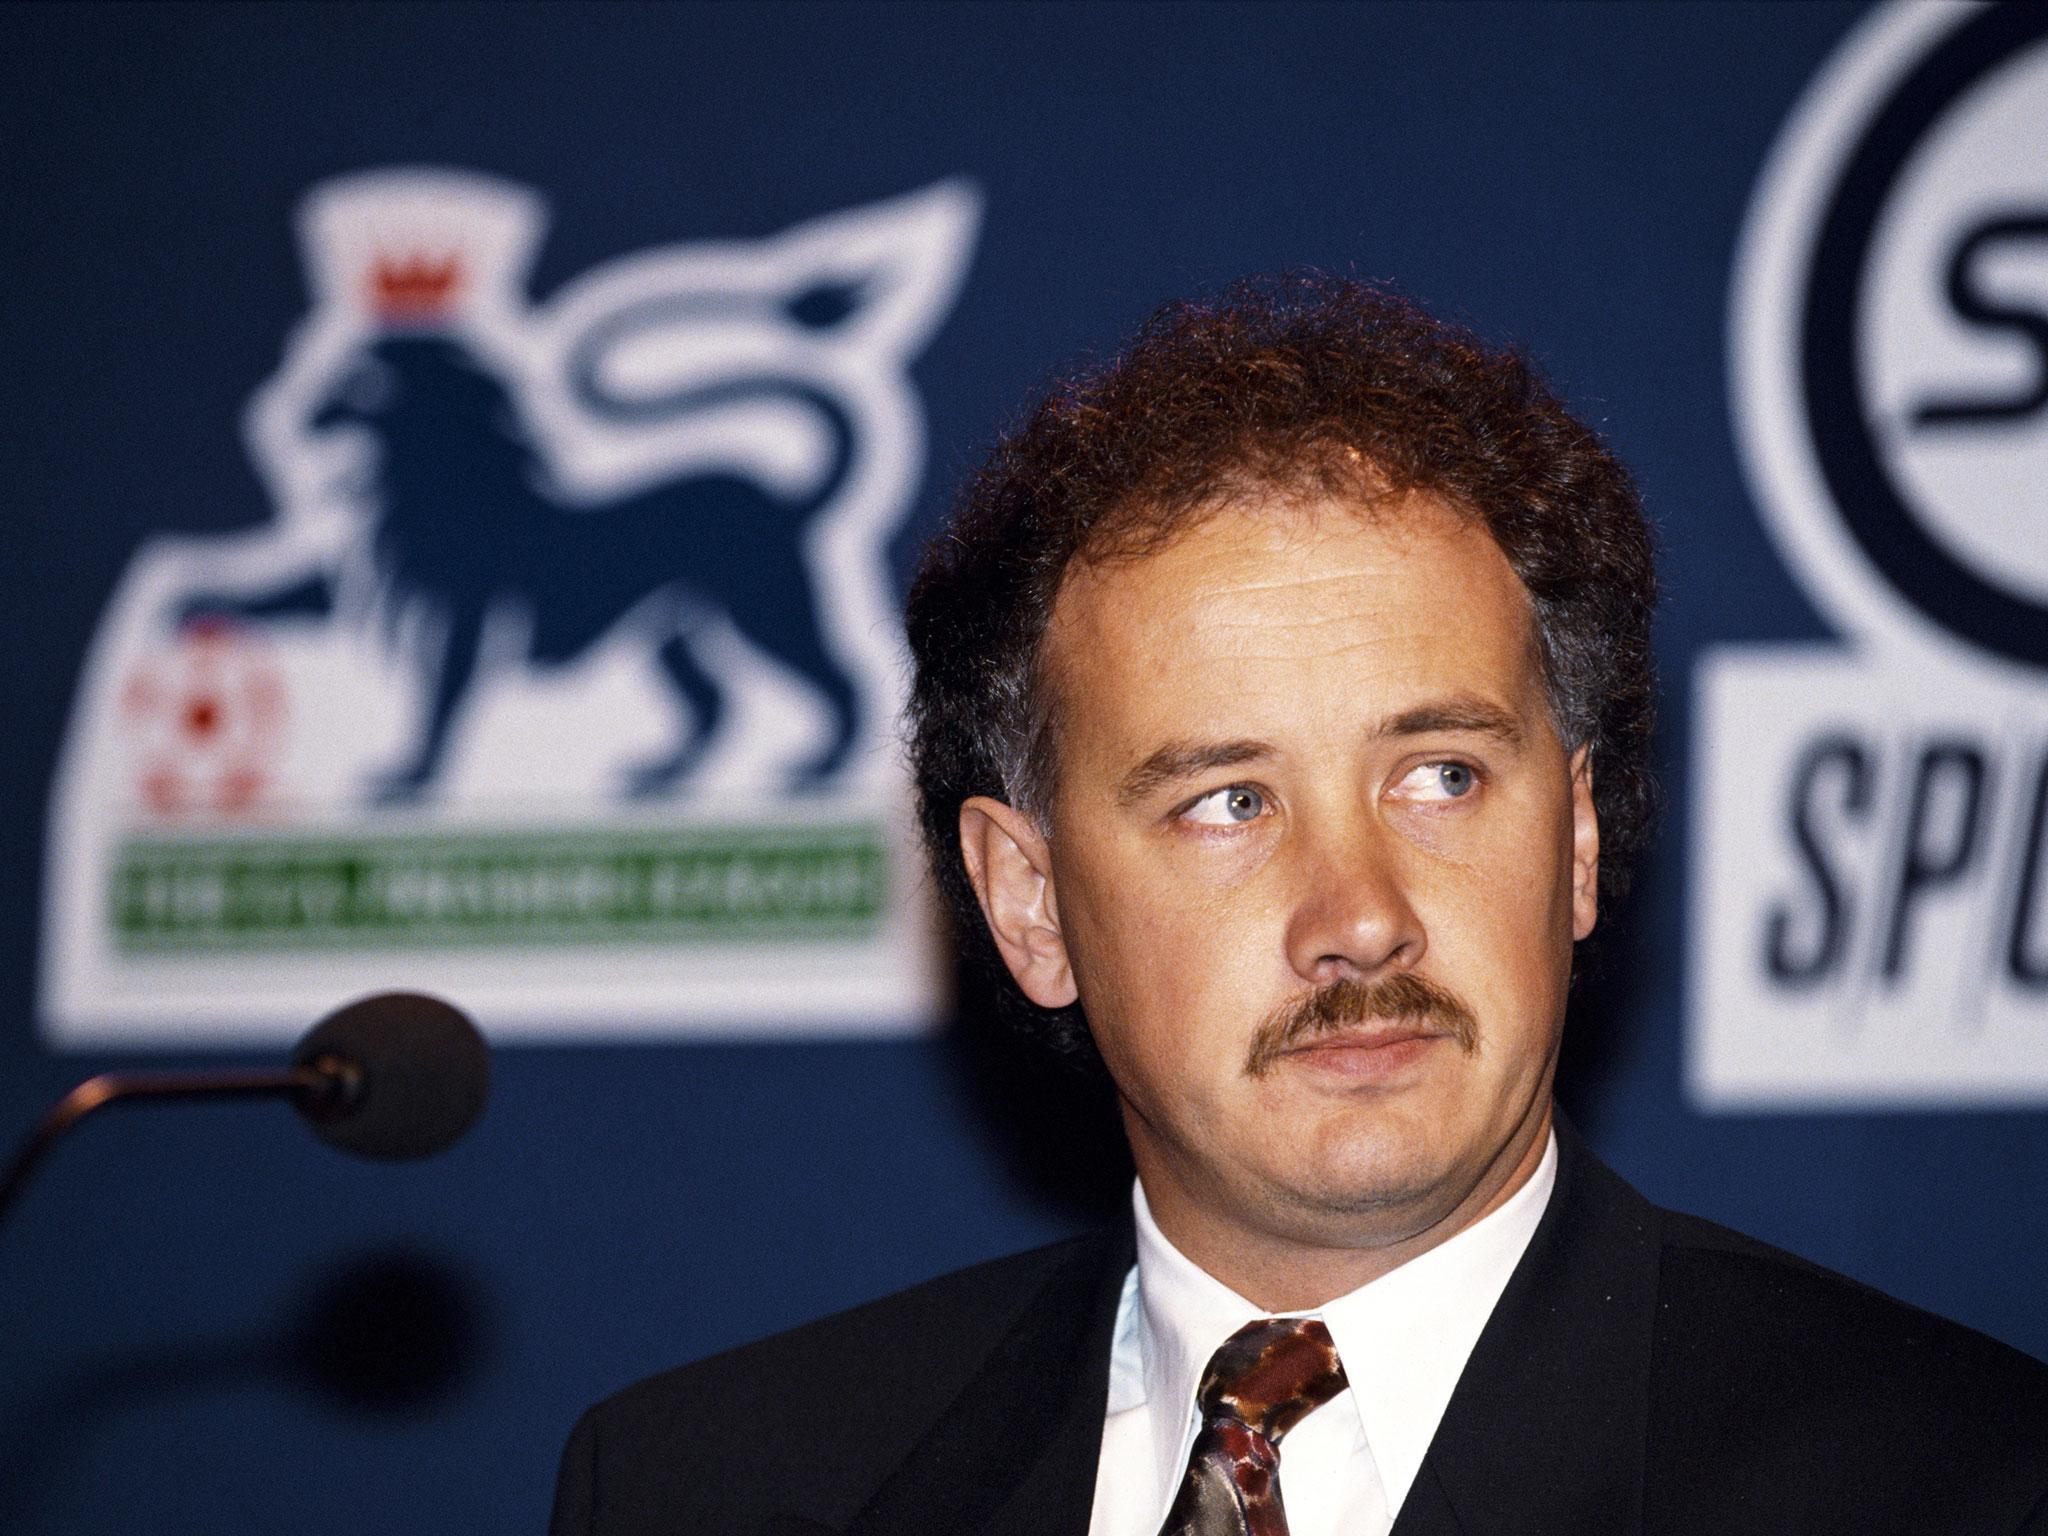 Rick Parry was the Premier League's first chief executive and remembers its inception well